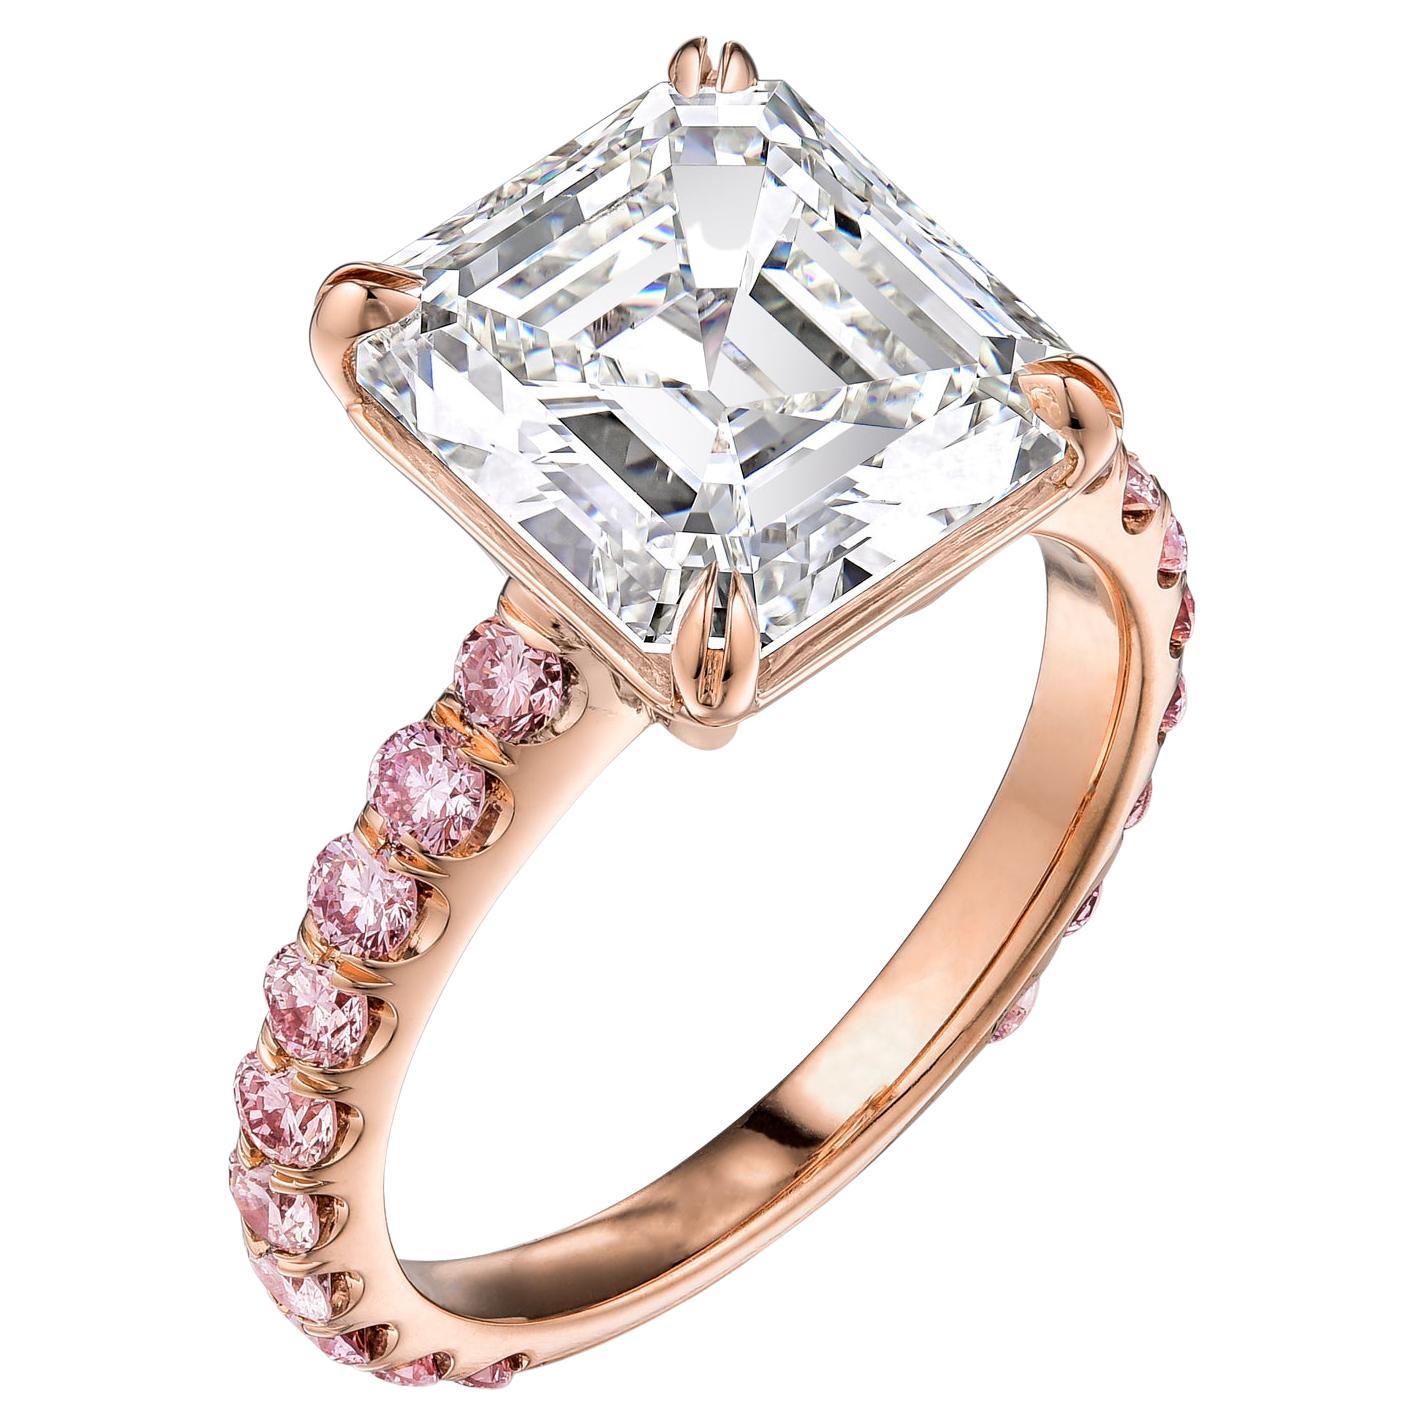 Diamond engagement ring set in 14K pink gold with GIA certificate, no. 2131165653. Details are: Center stone: 4.54ct / J VS2 Asscher/ square emerald cut diamond with fancy light pink diamonds 3/4 way along shank. Center stone dimensions: 10.02 x